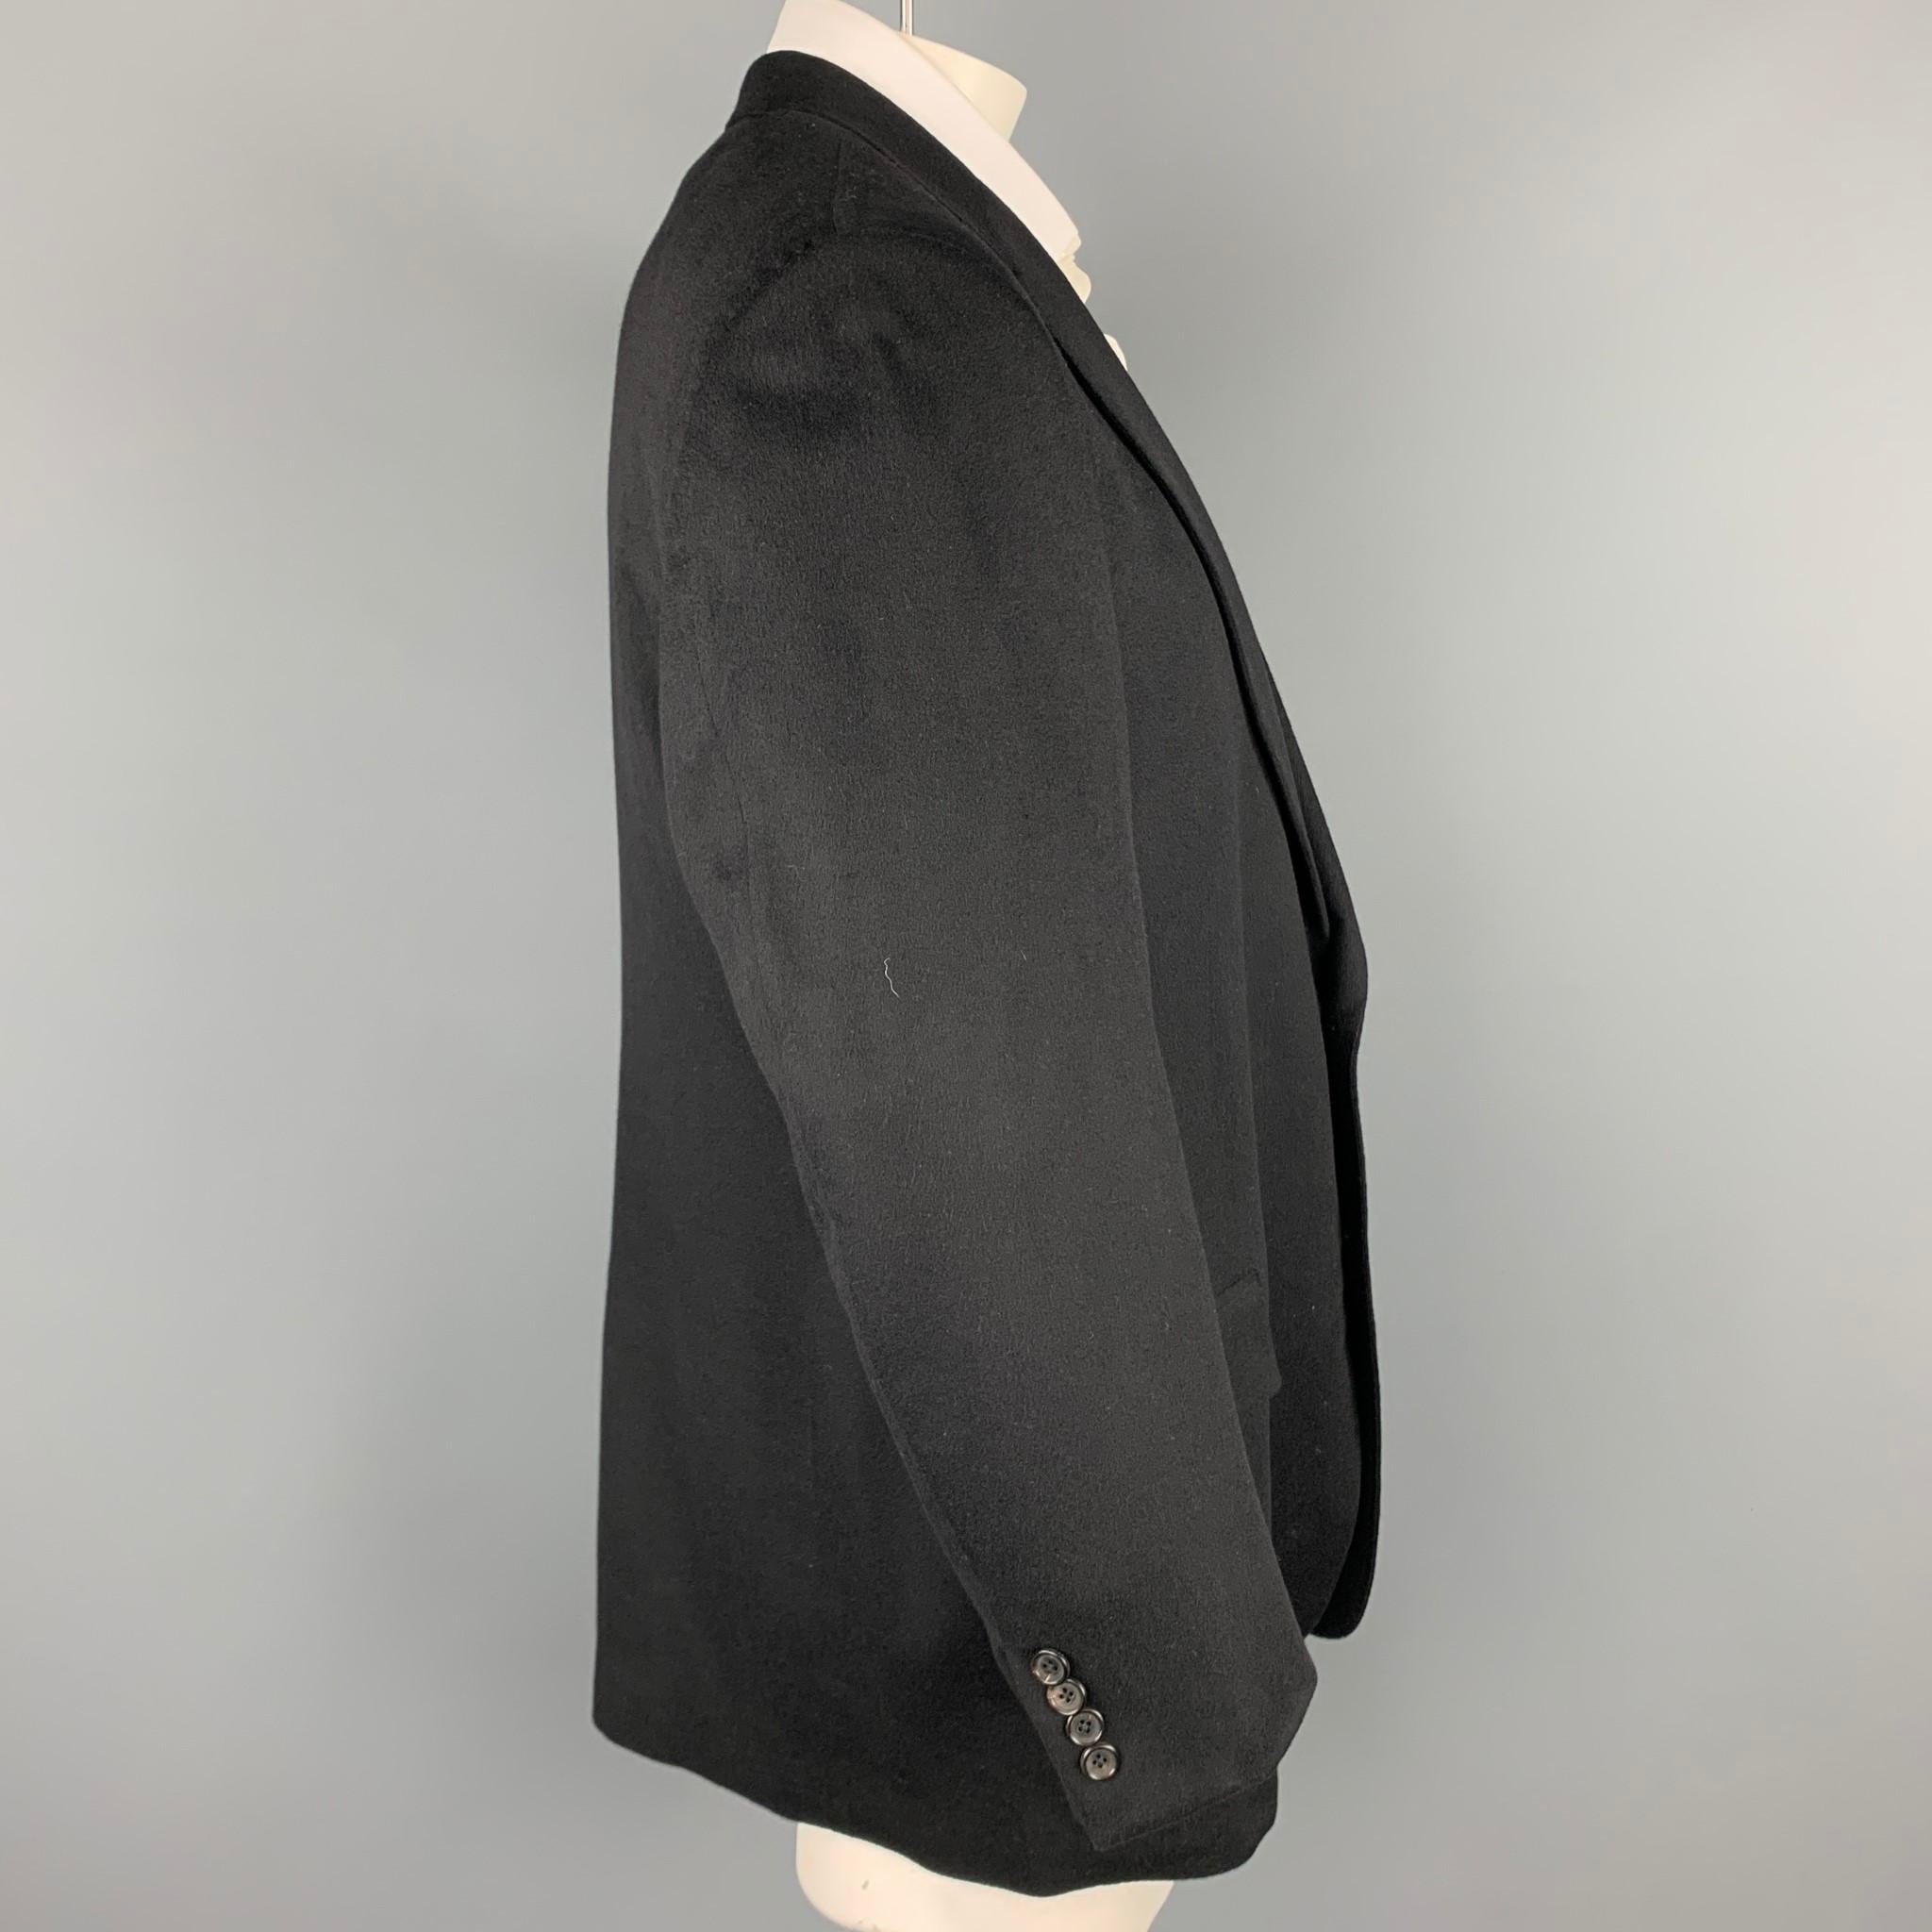 BROOKS BROTHERS by LORO PIANA sport coat comes in a black cashmere with a full liner featuring a notch lapel, flap pockets, and a two button closure.

Very Good Pre-Owned Condition.
Marked: 46 R

Measurements:

Shoulder: 20 in.
Chest: 46 in.
Sleeve: